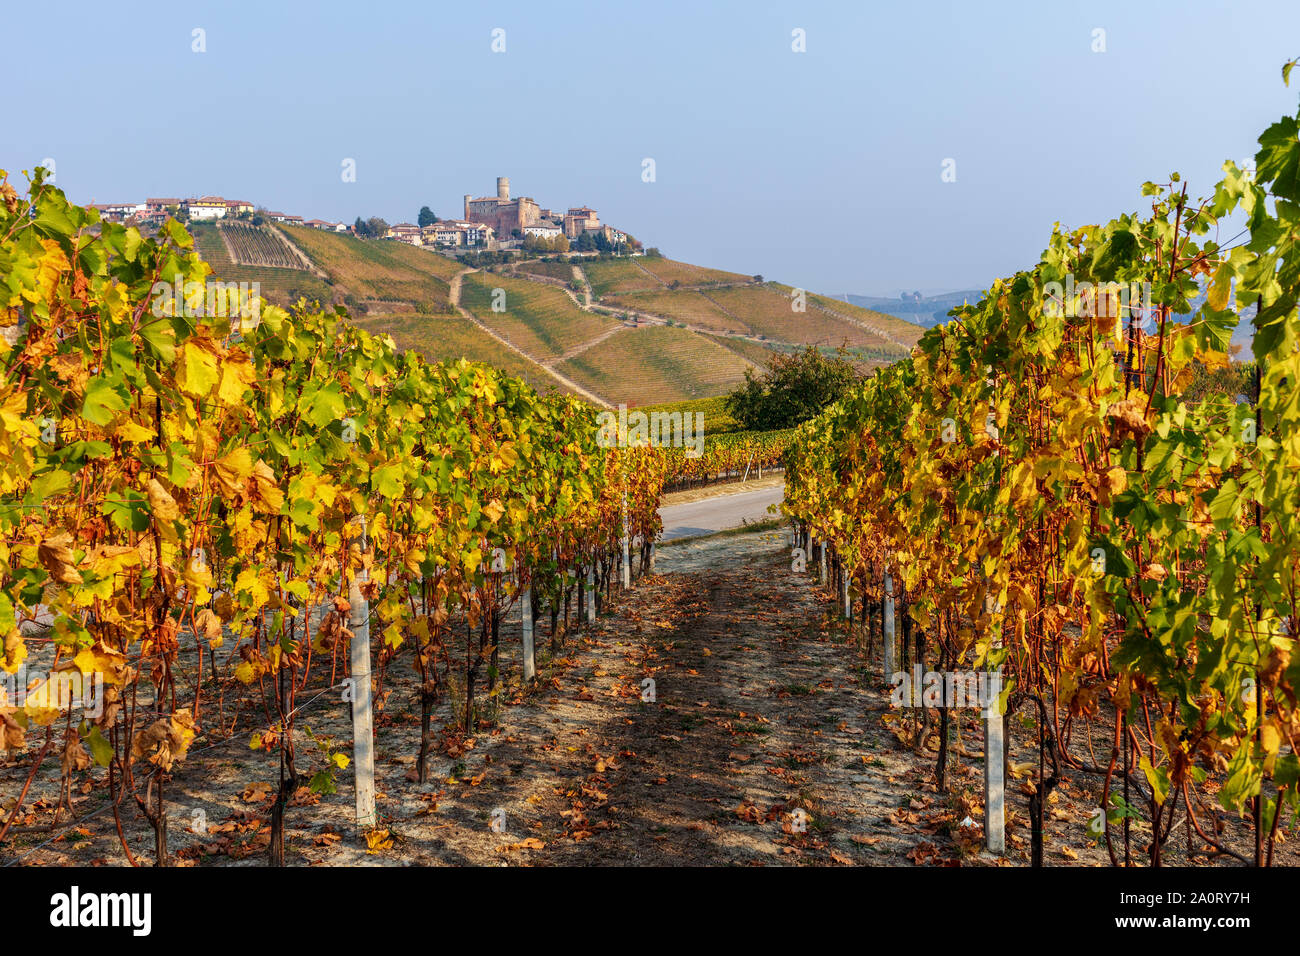 Autumnal vineyards in a row on the hills of Langhe in Piedmont, Northern Italy. Stock Photo